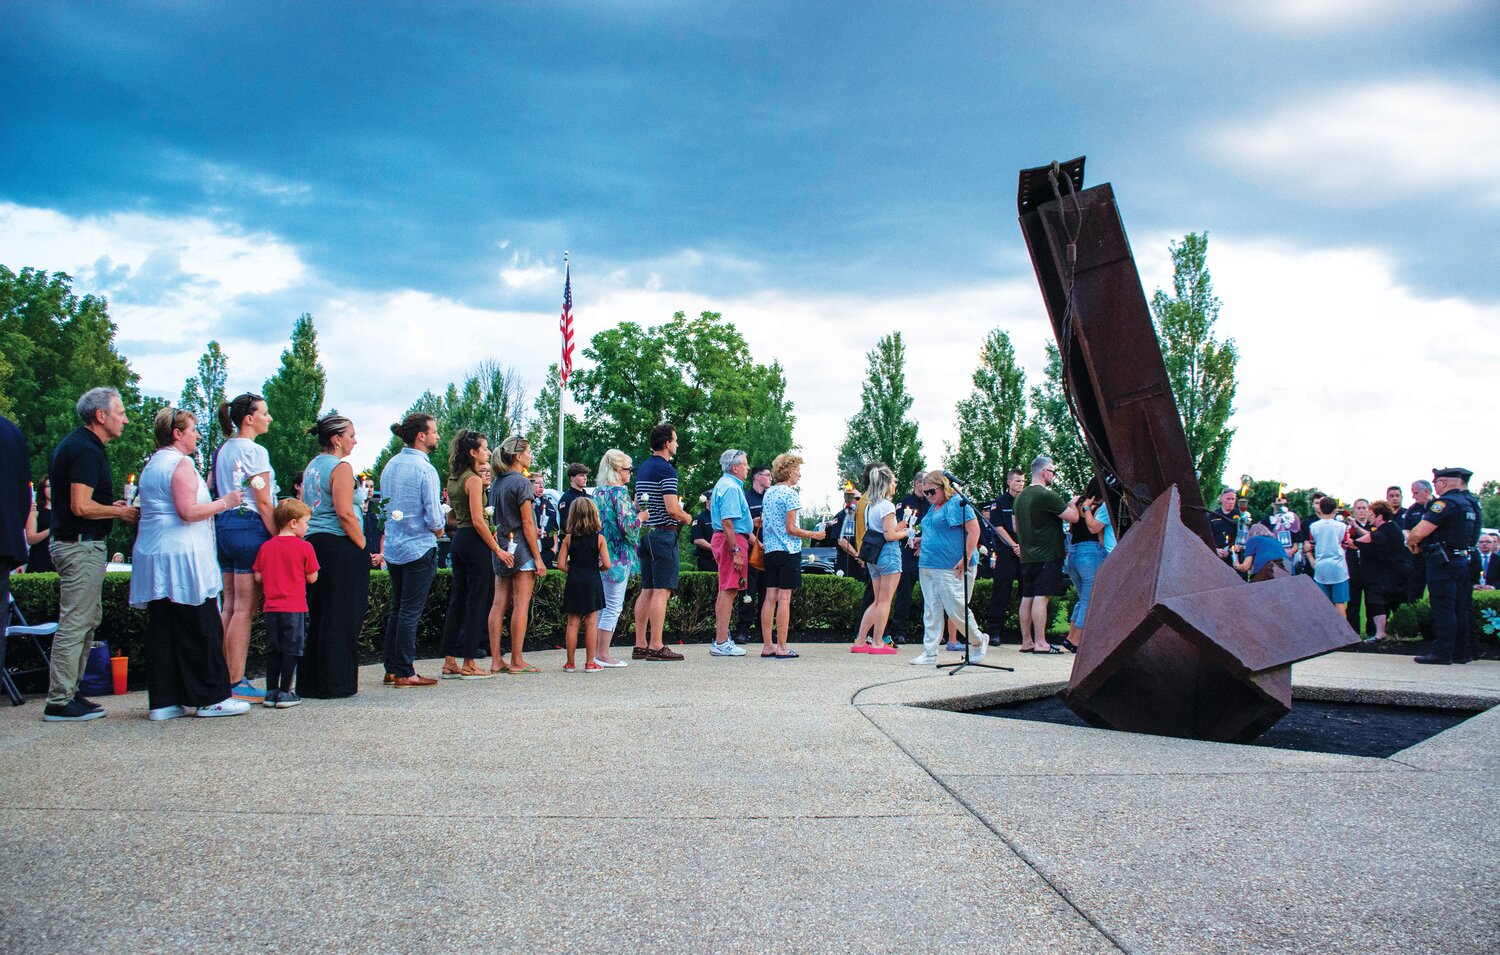 At the Garden of Reflection, vigil attendees stand in line to place flowers in front of torches dedicated to the victims of the July 15 flash floods in Upper Makefield.